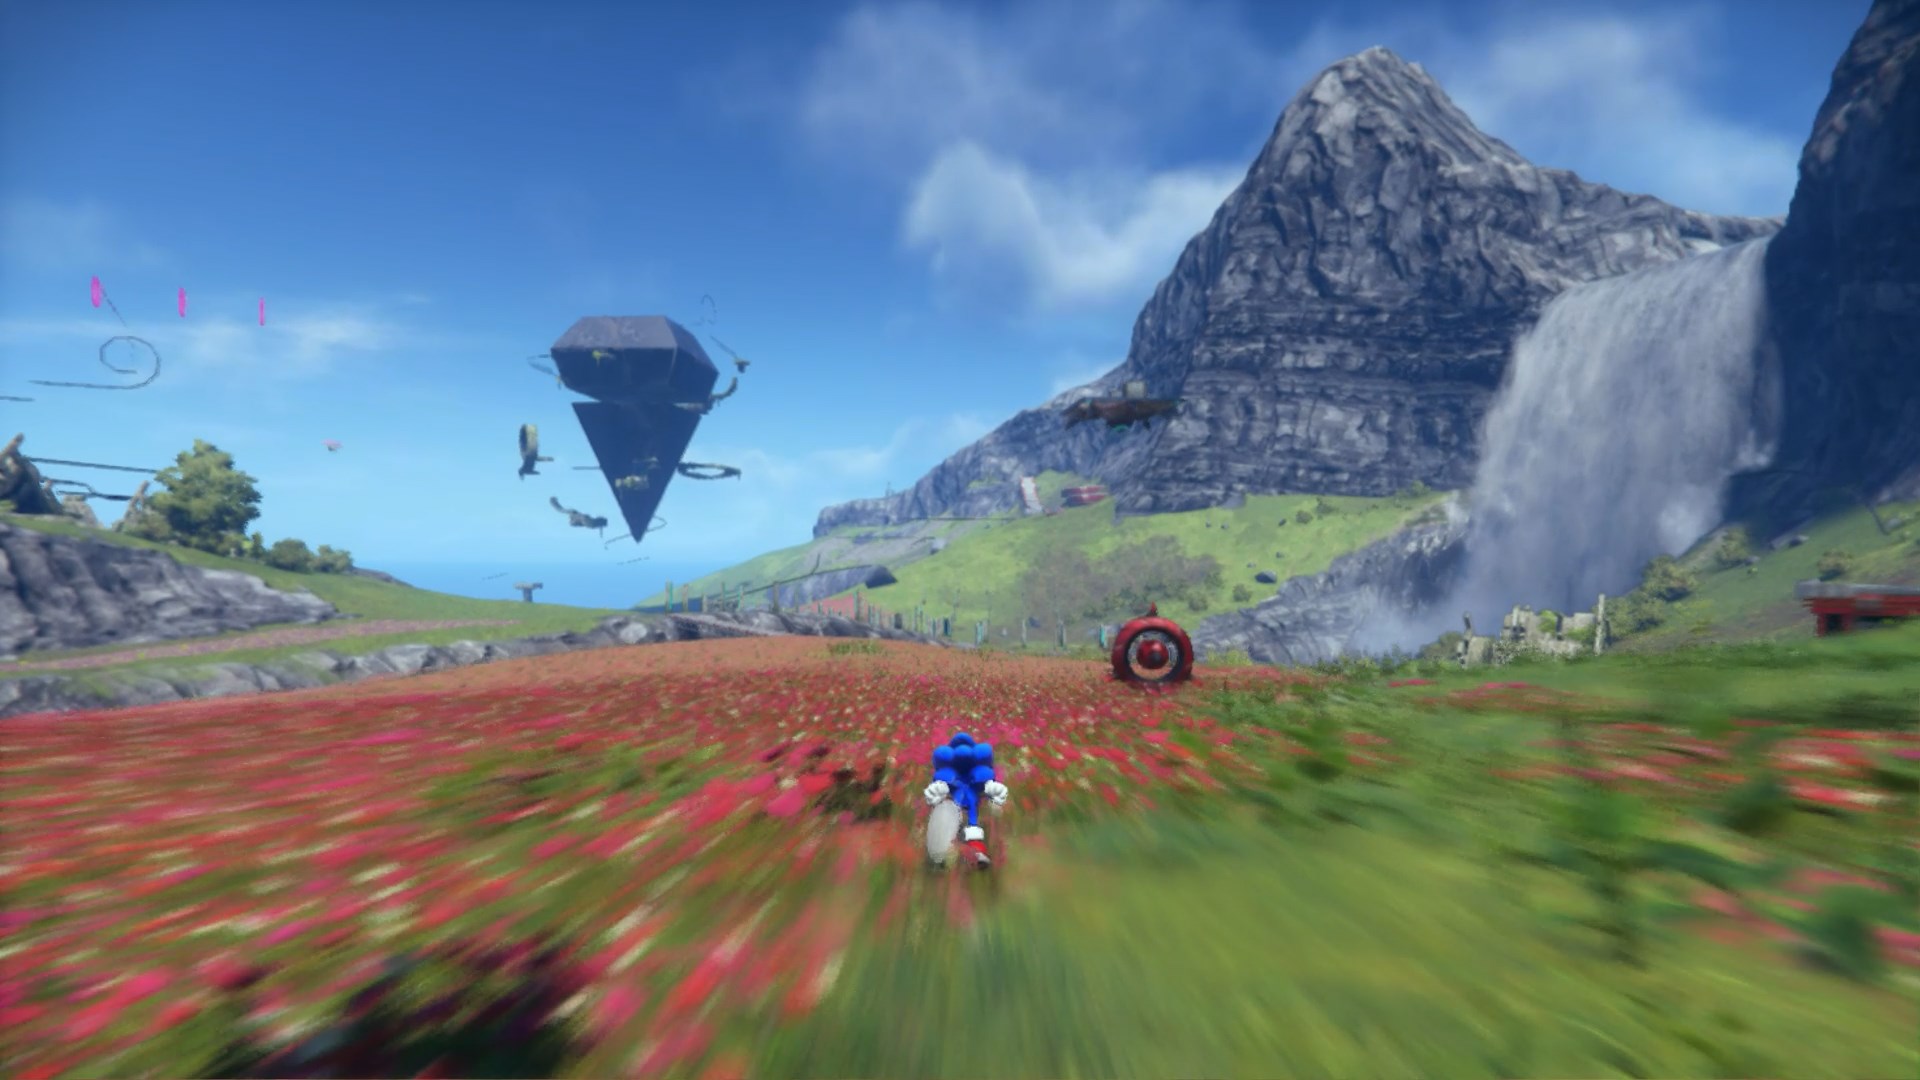 Sonic Frontiers Showcases its Huge World and Classic Elements in 7 Minutes  of Gameplay